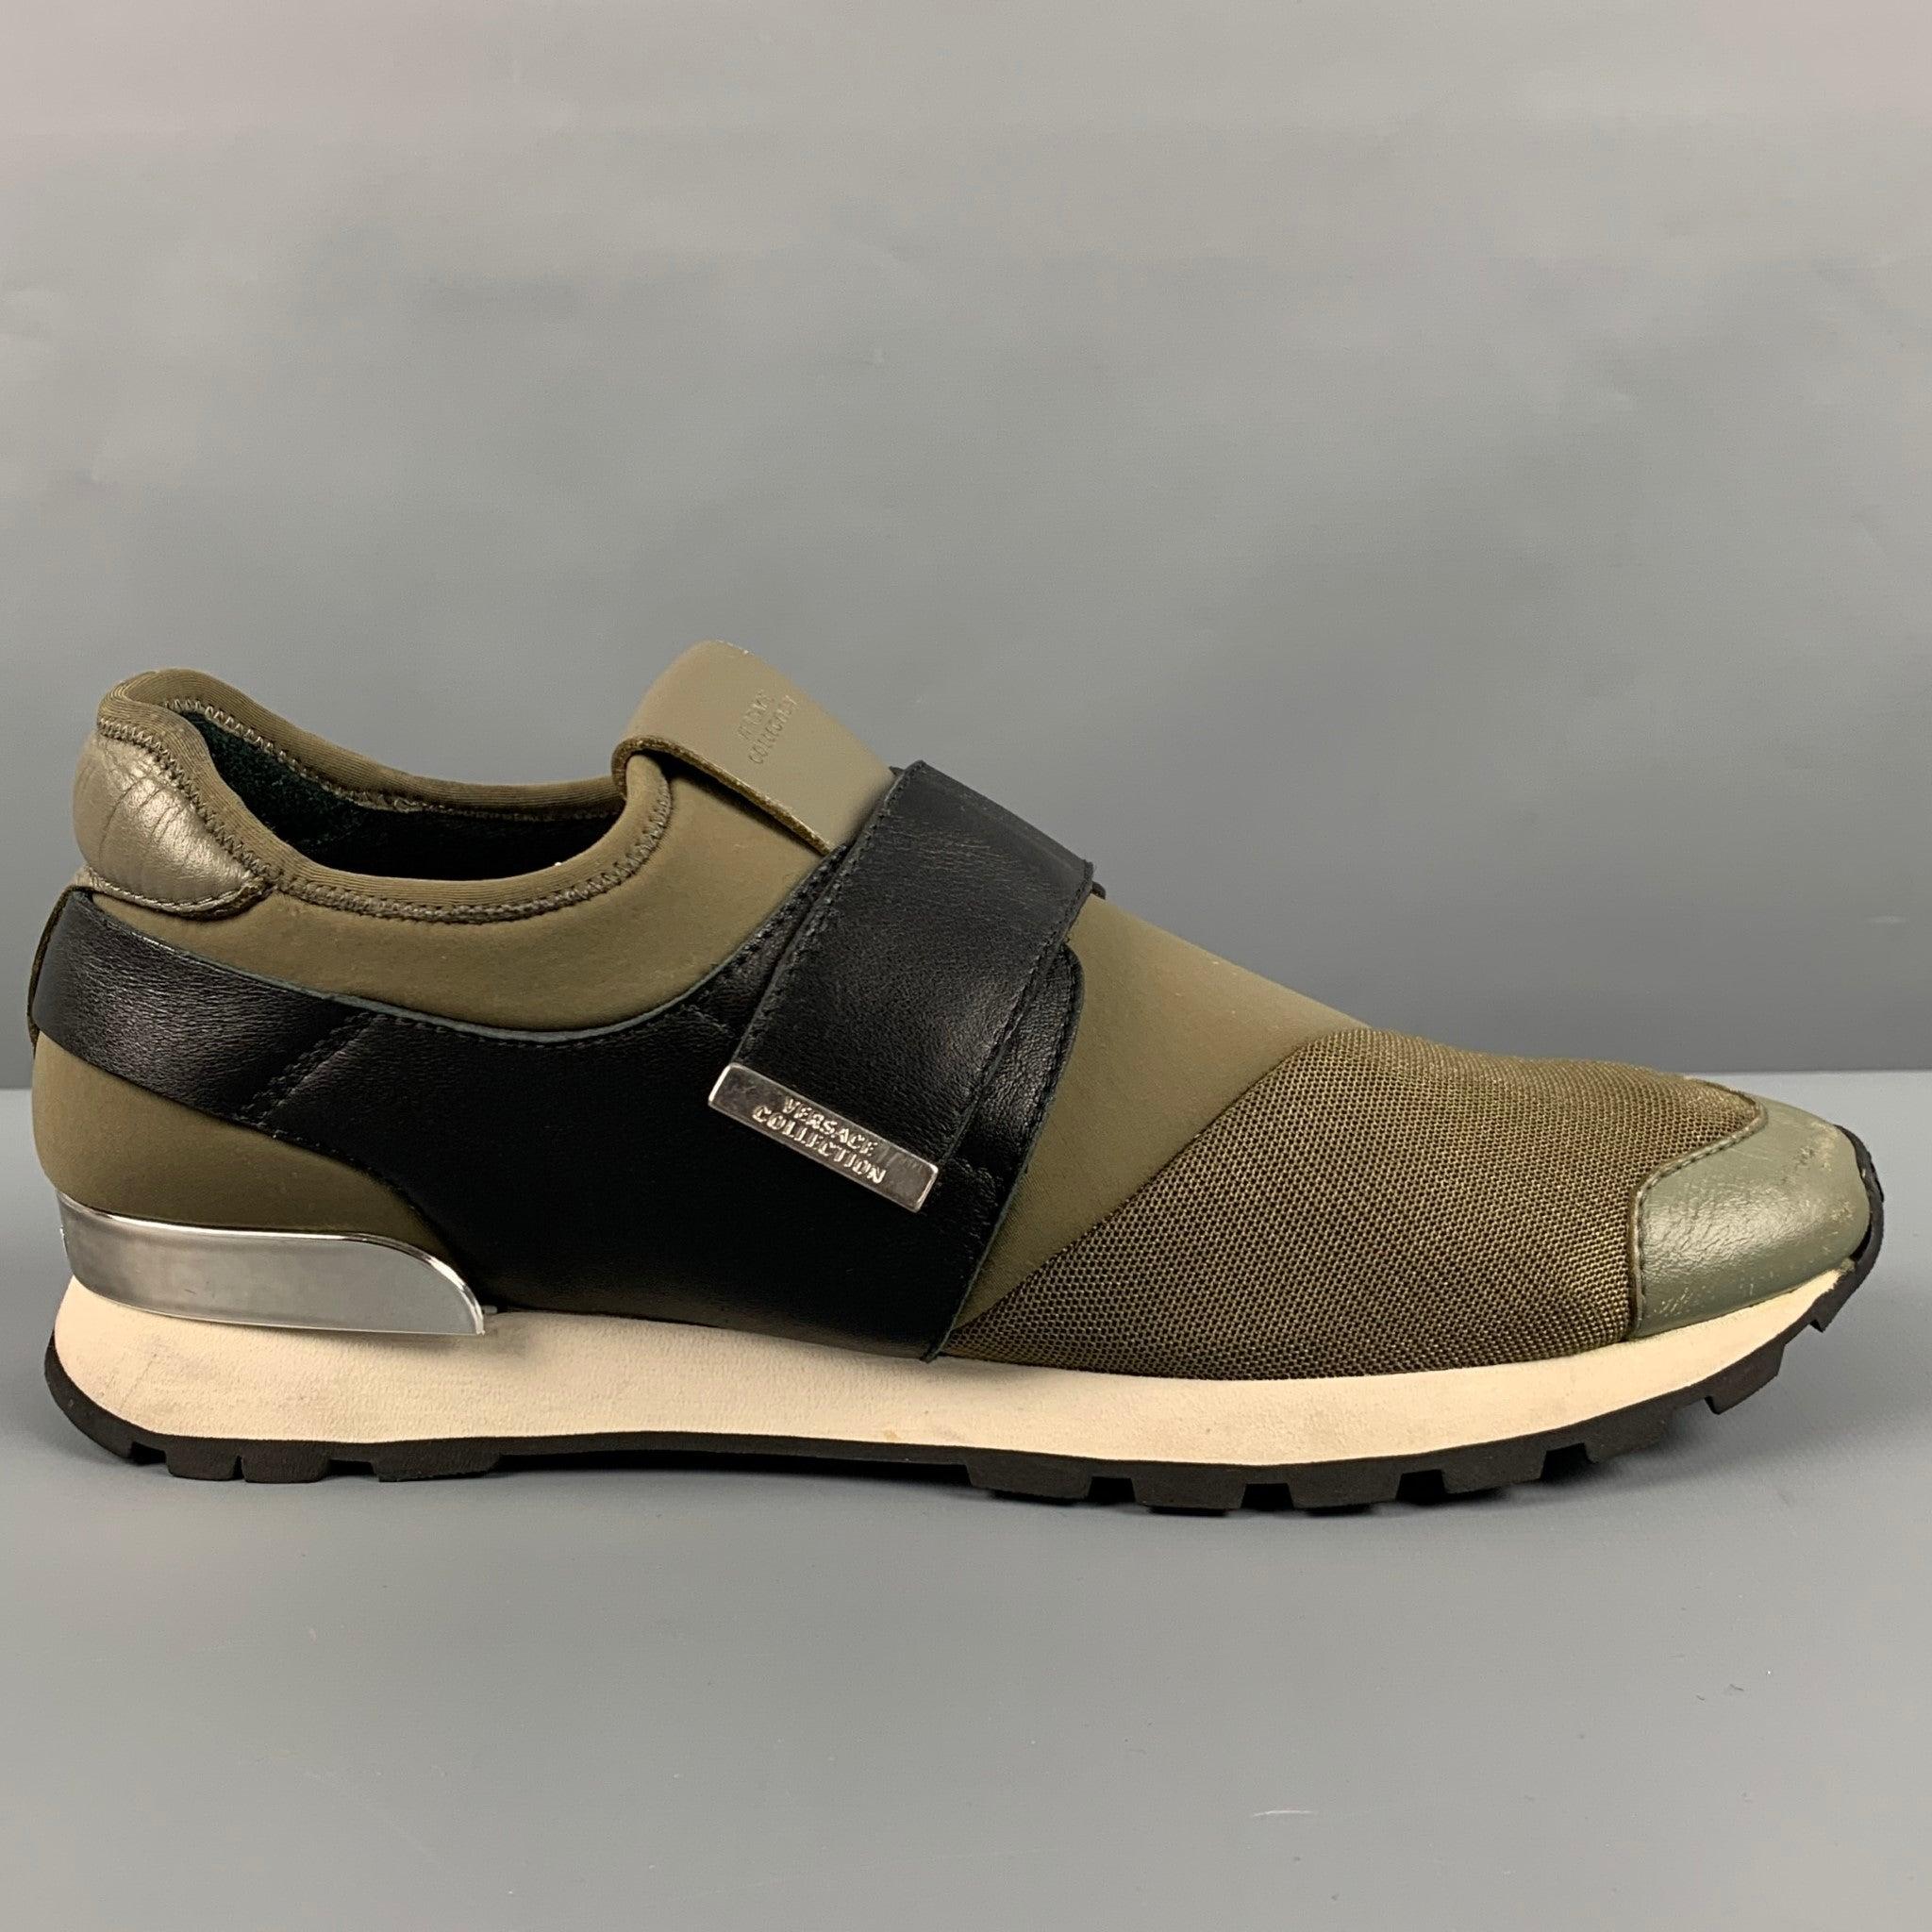 VERSACE COLLECTION sneakers
in a
green neoprene fabric featuring a color block style, black leather trim, and self-fastening closure. Made in Romania.Very Good Pre-Owned Condition. Moderate signs of wear. 

Marked:   43Outsole: 11.75 inches  x 4.25